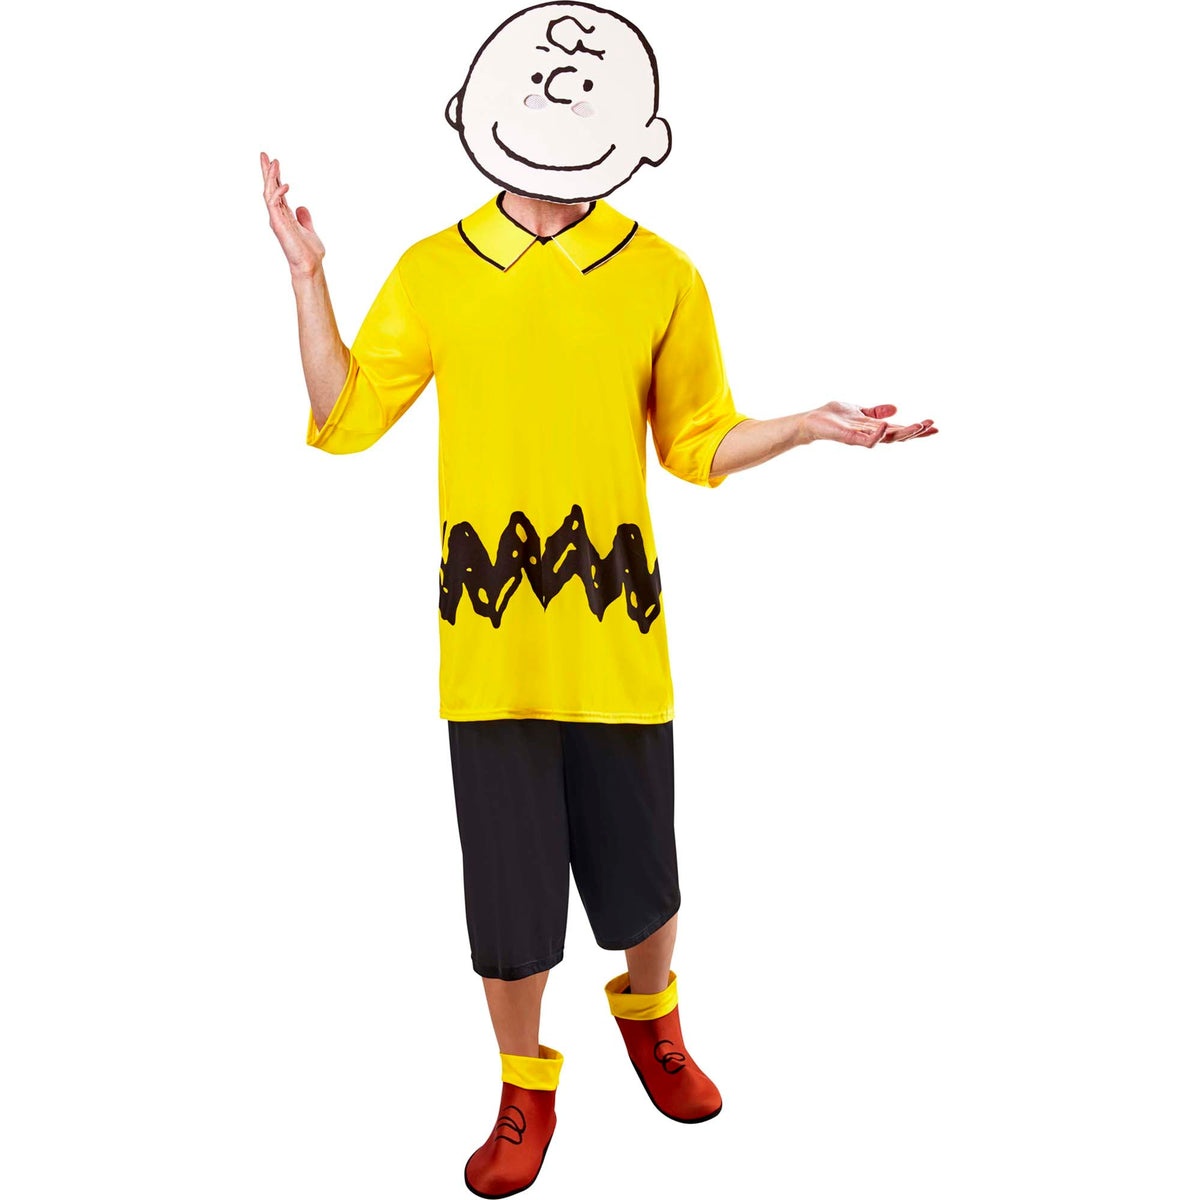 RUBIES II (Ruby Slipper Sales) Costumes Peanuts Charlie Brown Costume for Adults, Yellow Shirt